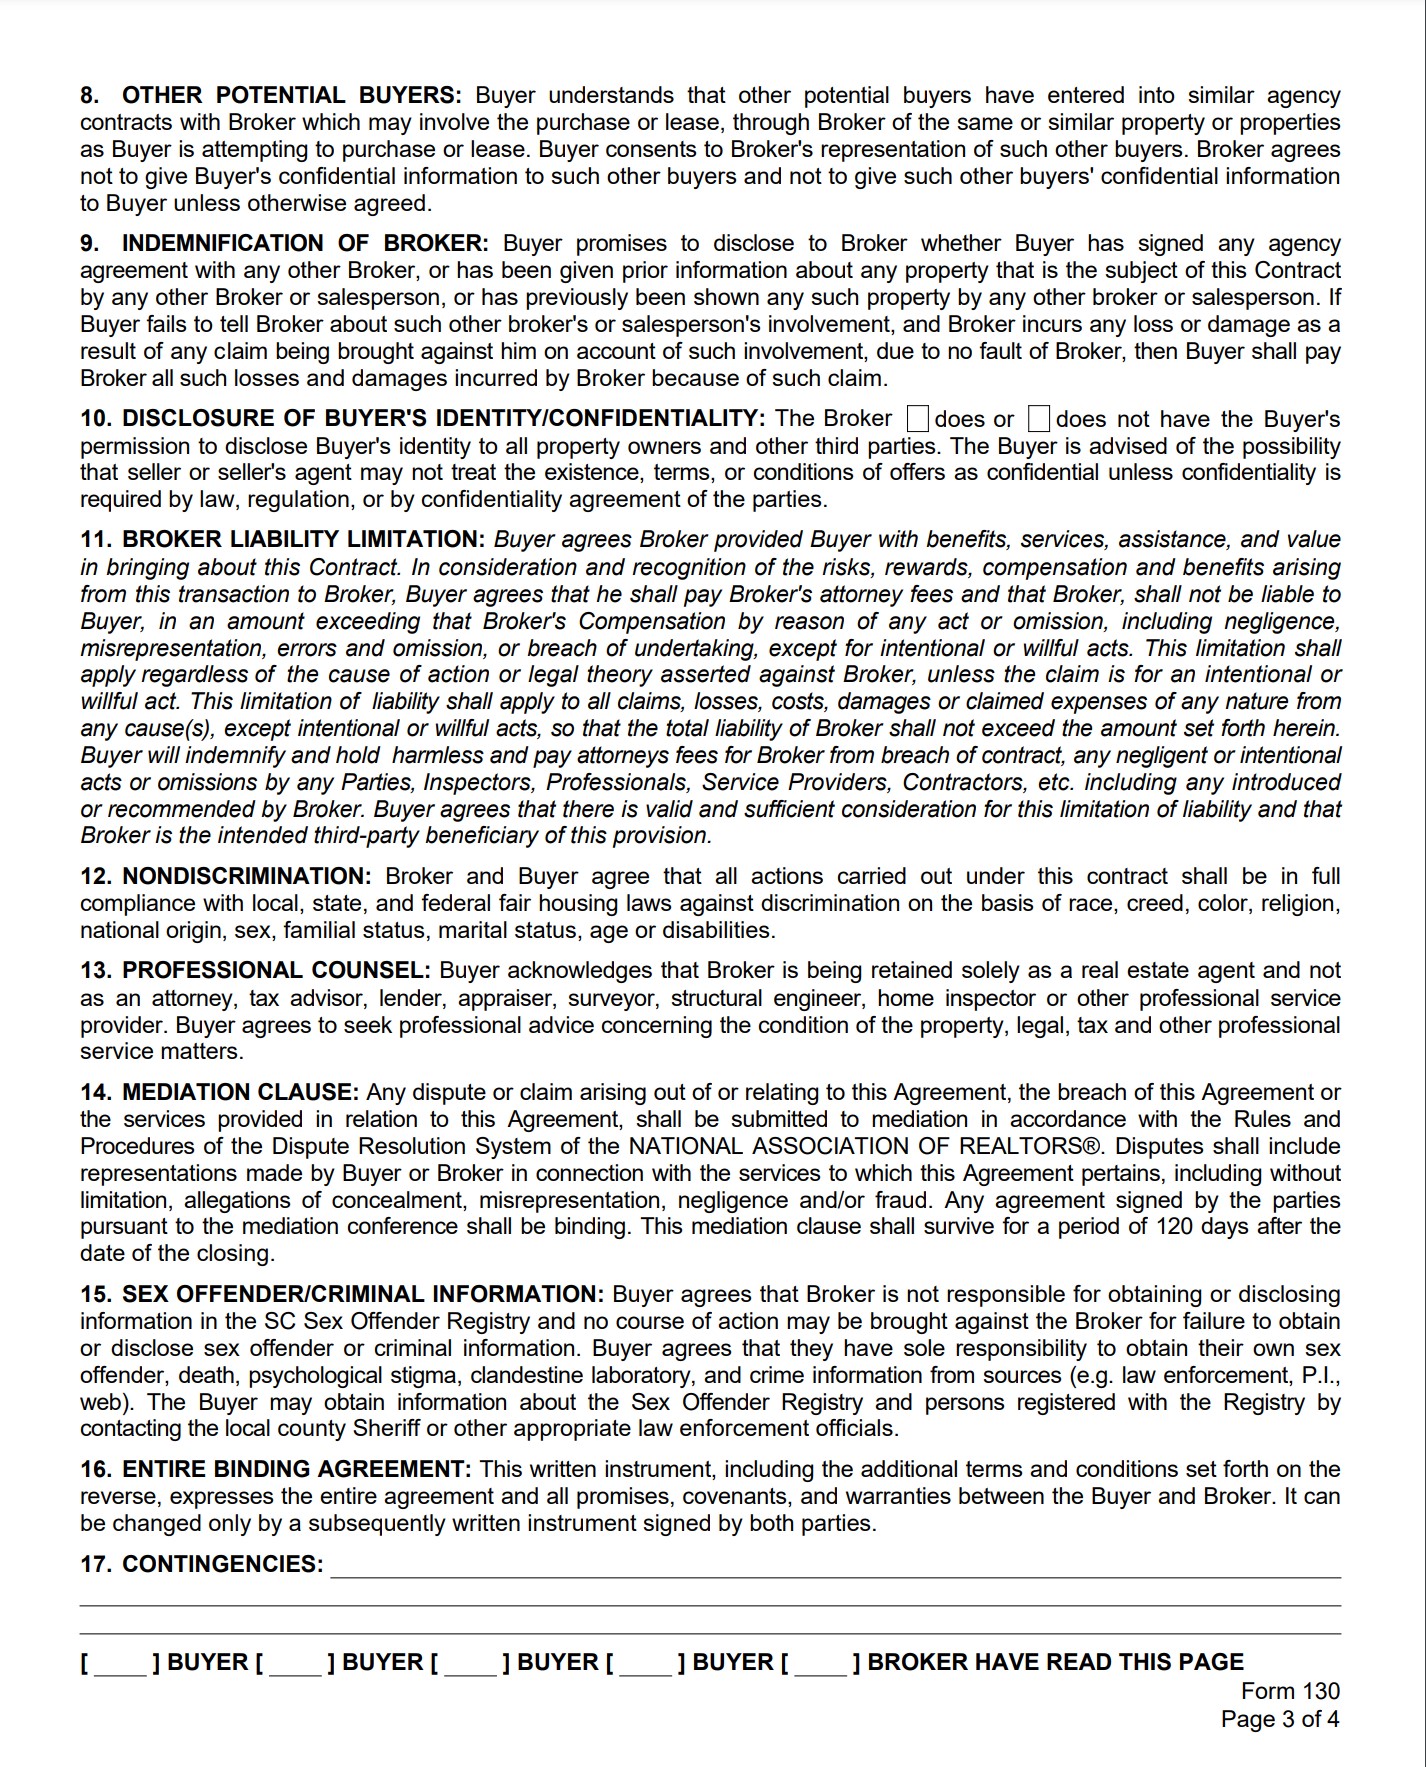 Buyer Agency Agreement - page 3